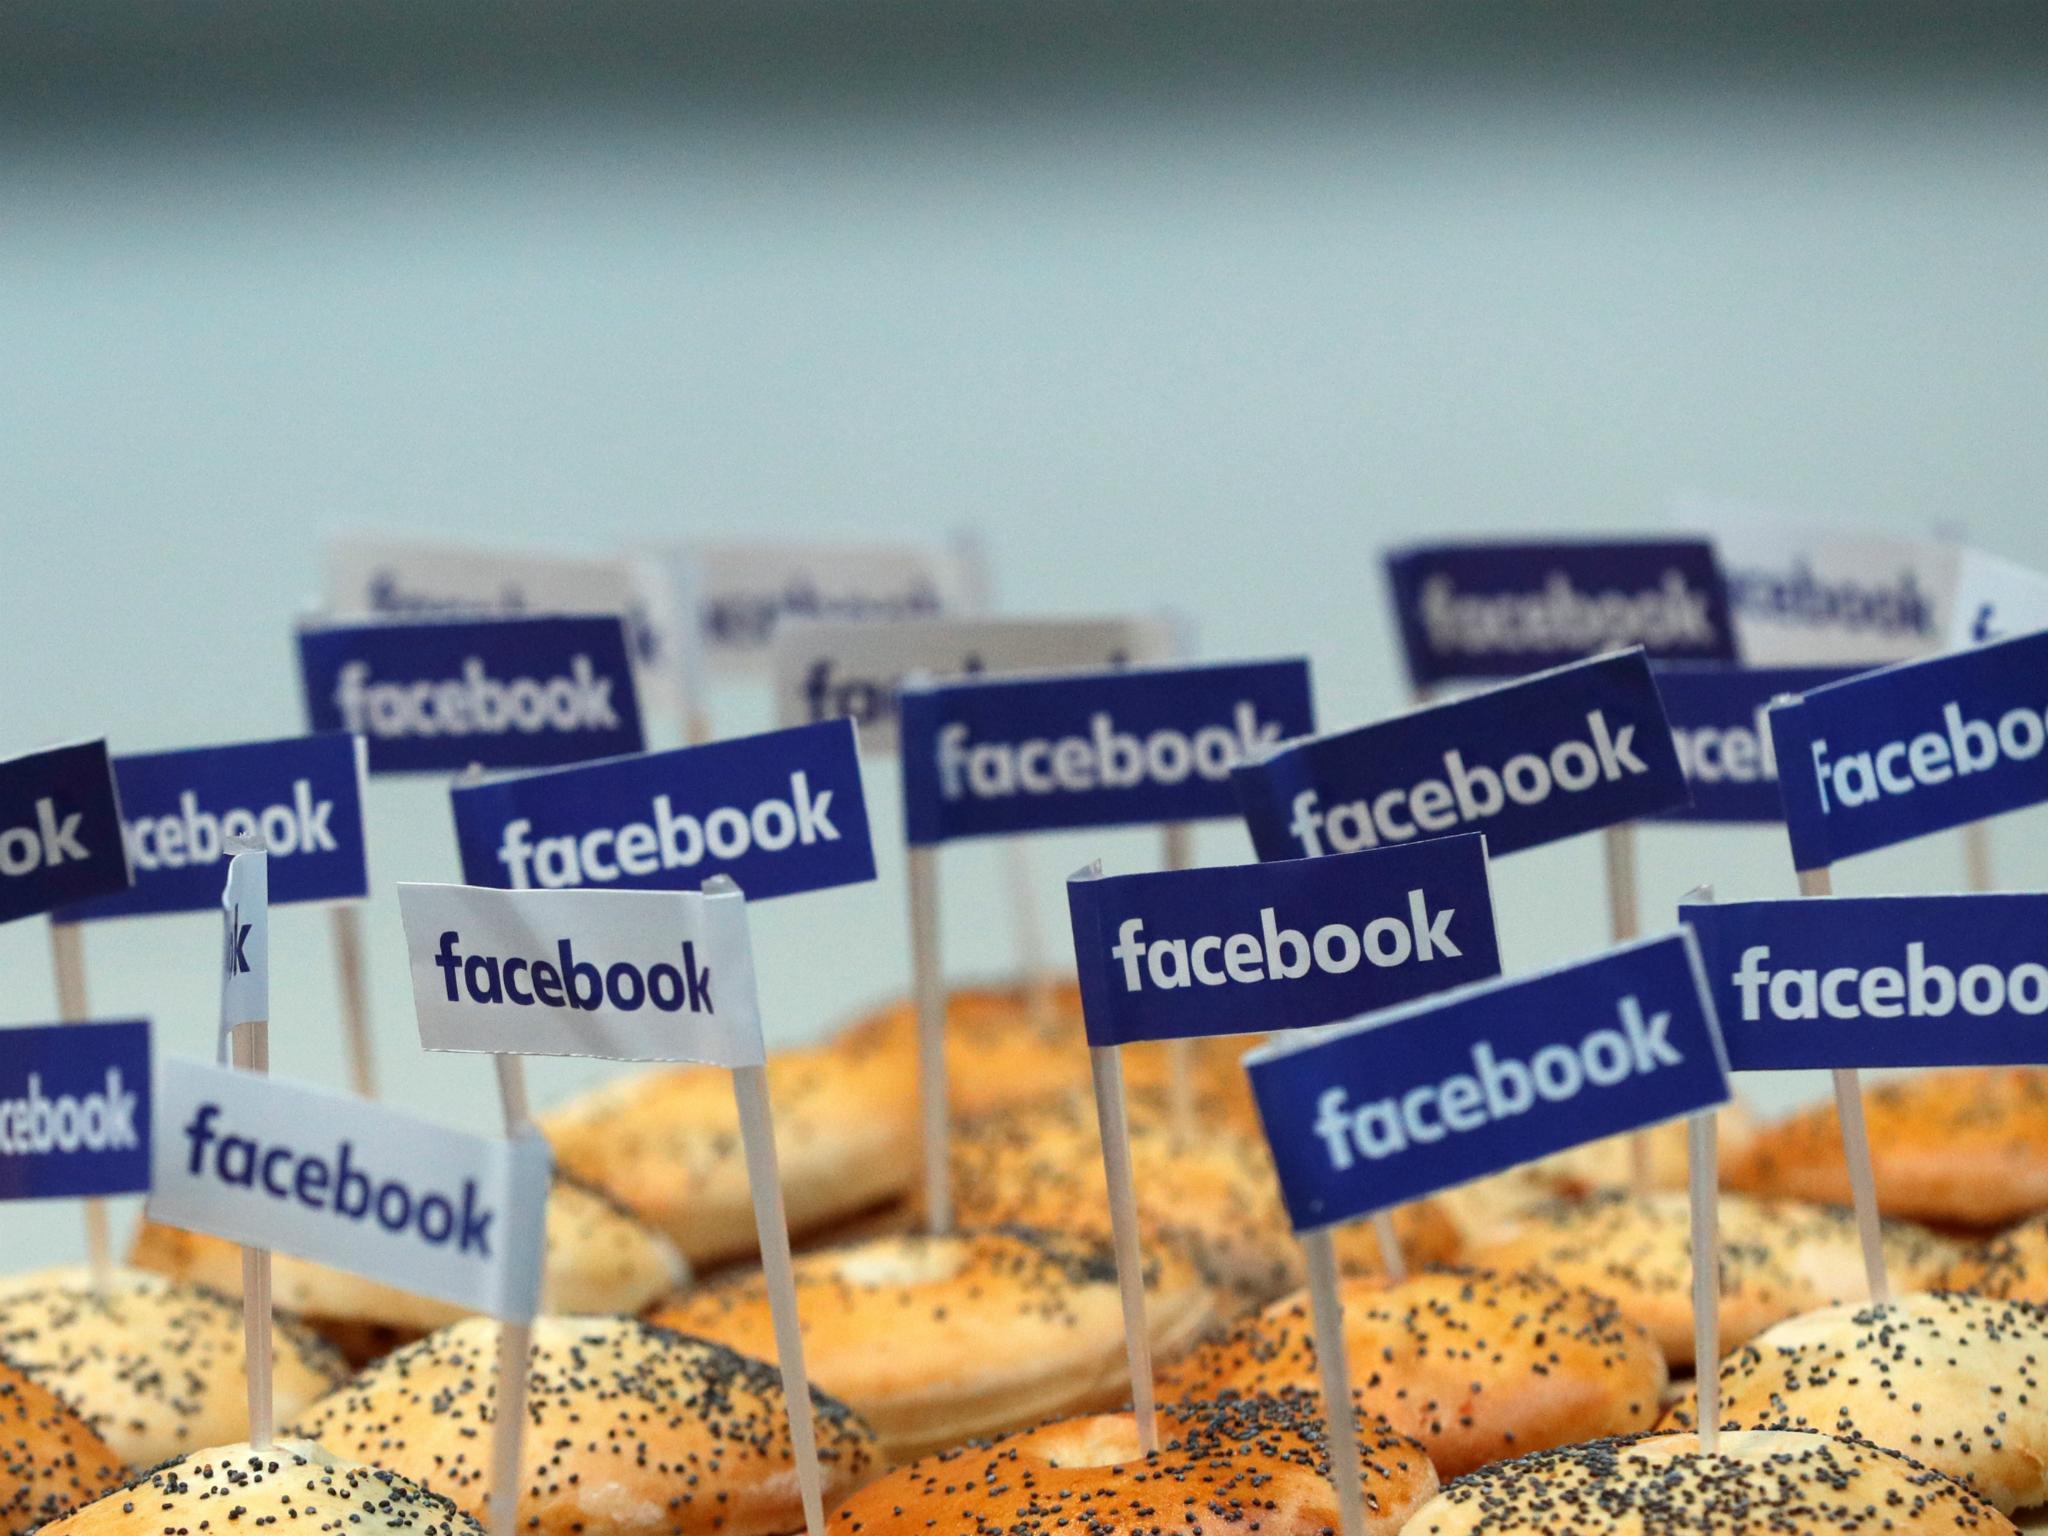 Miniature Facebook banners are seen on snacks prepared for the visit by Facebook's Chief Operating Officer in Paris, France, January 17, 2017